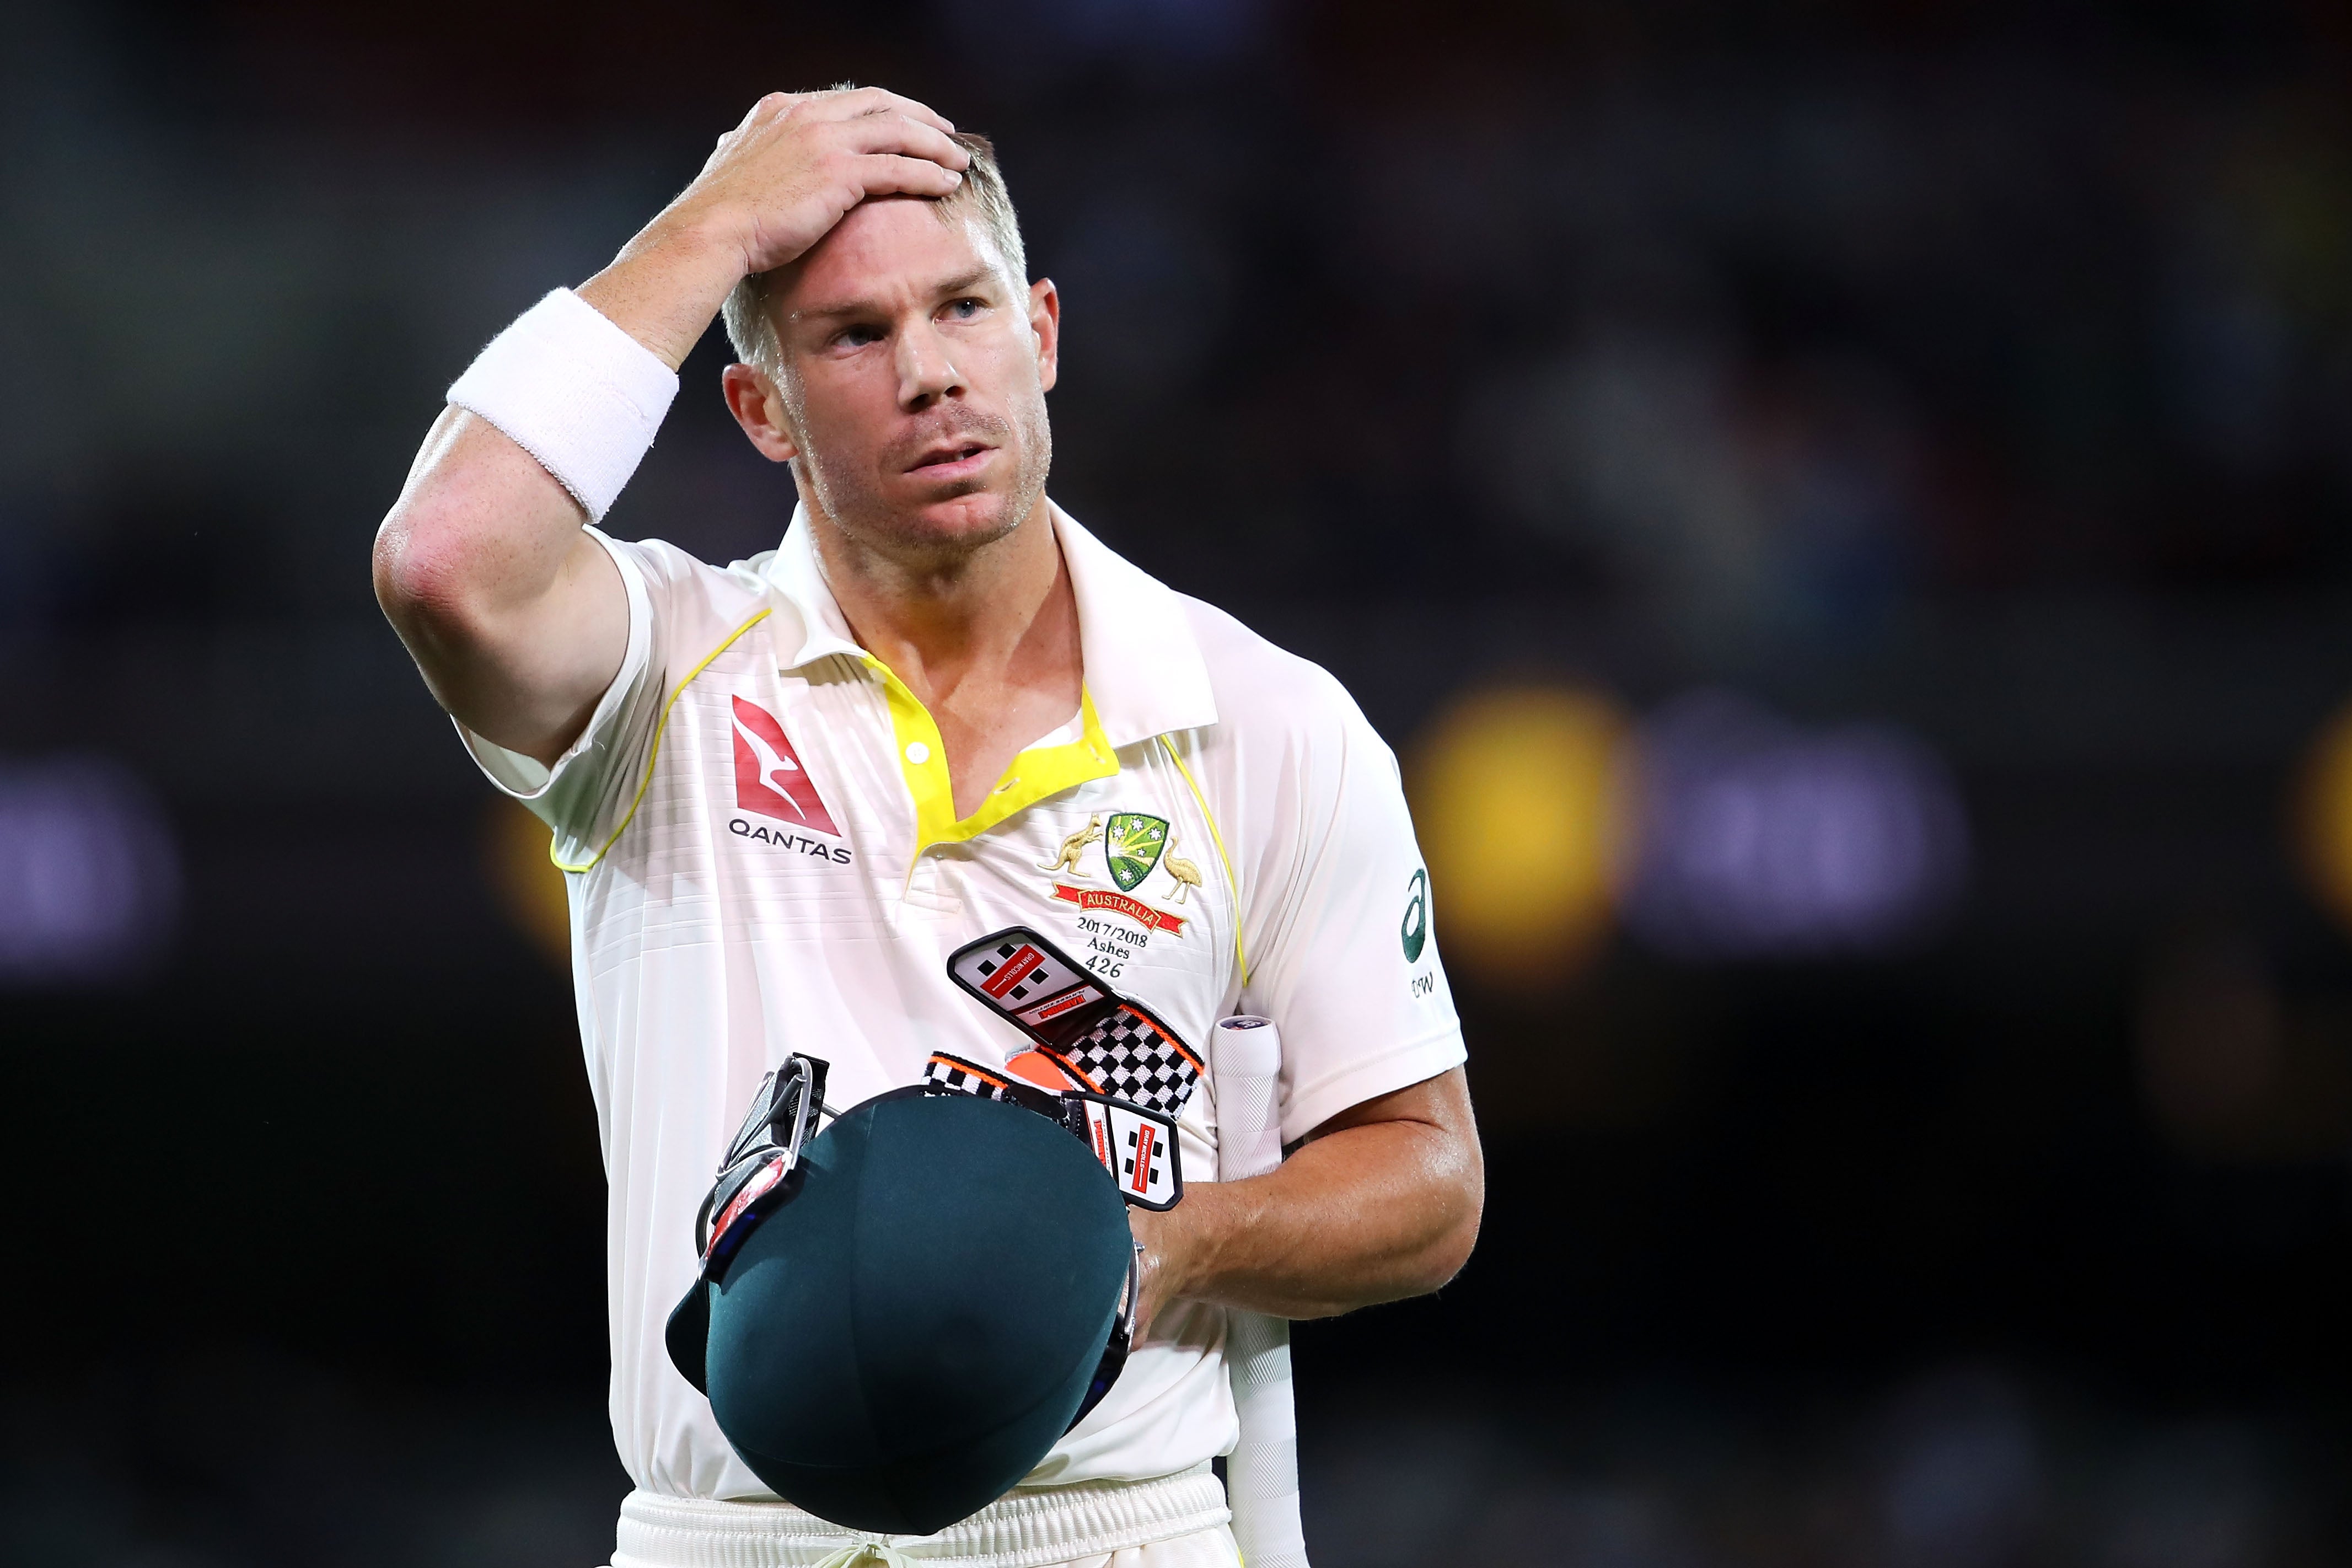 Australian David Warner has been dropped from the Sunrisers Hyderabad line-up